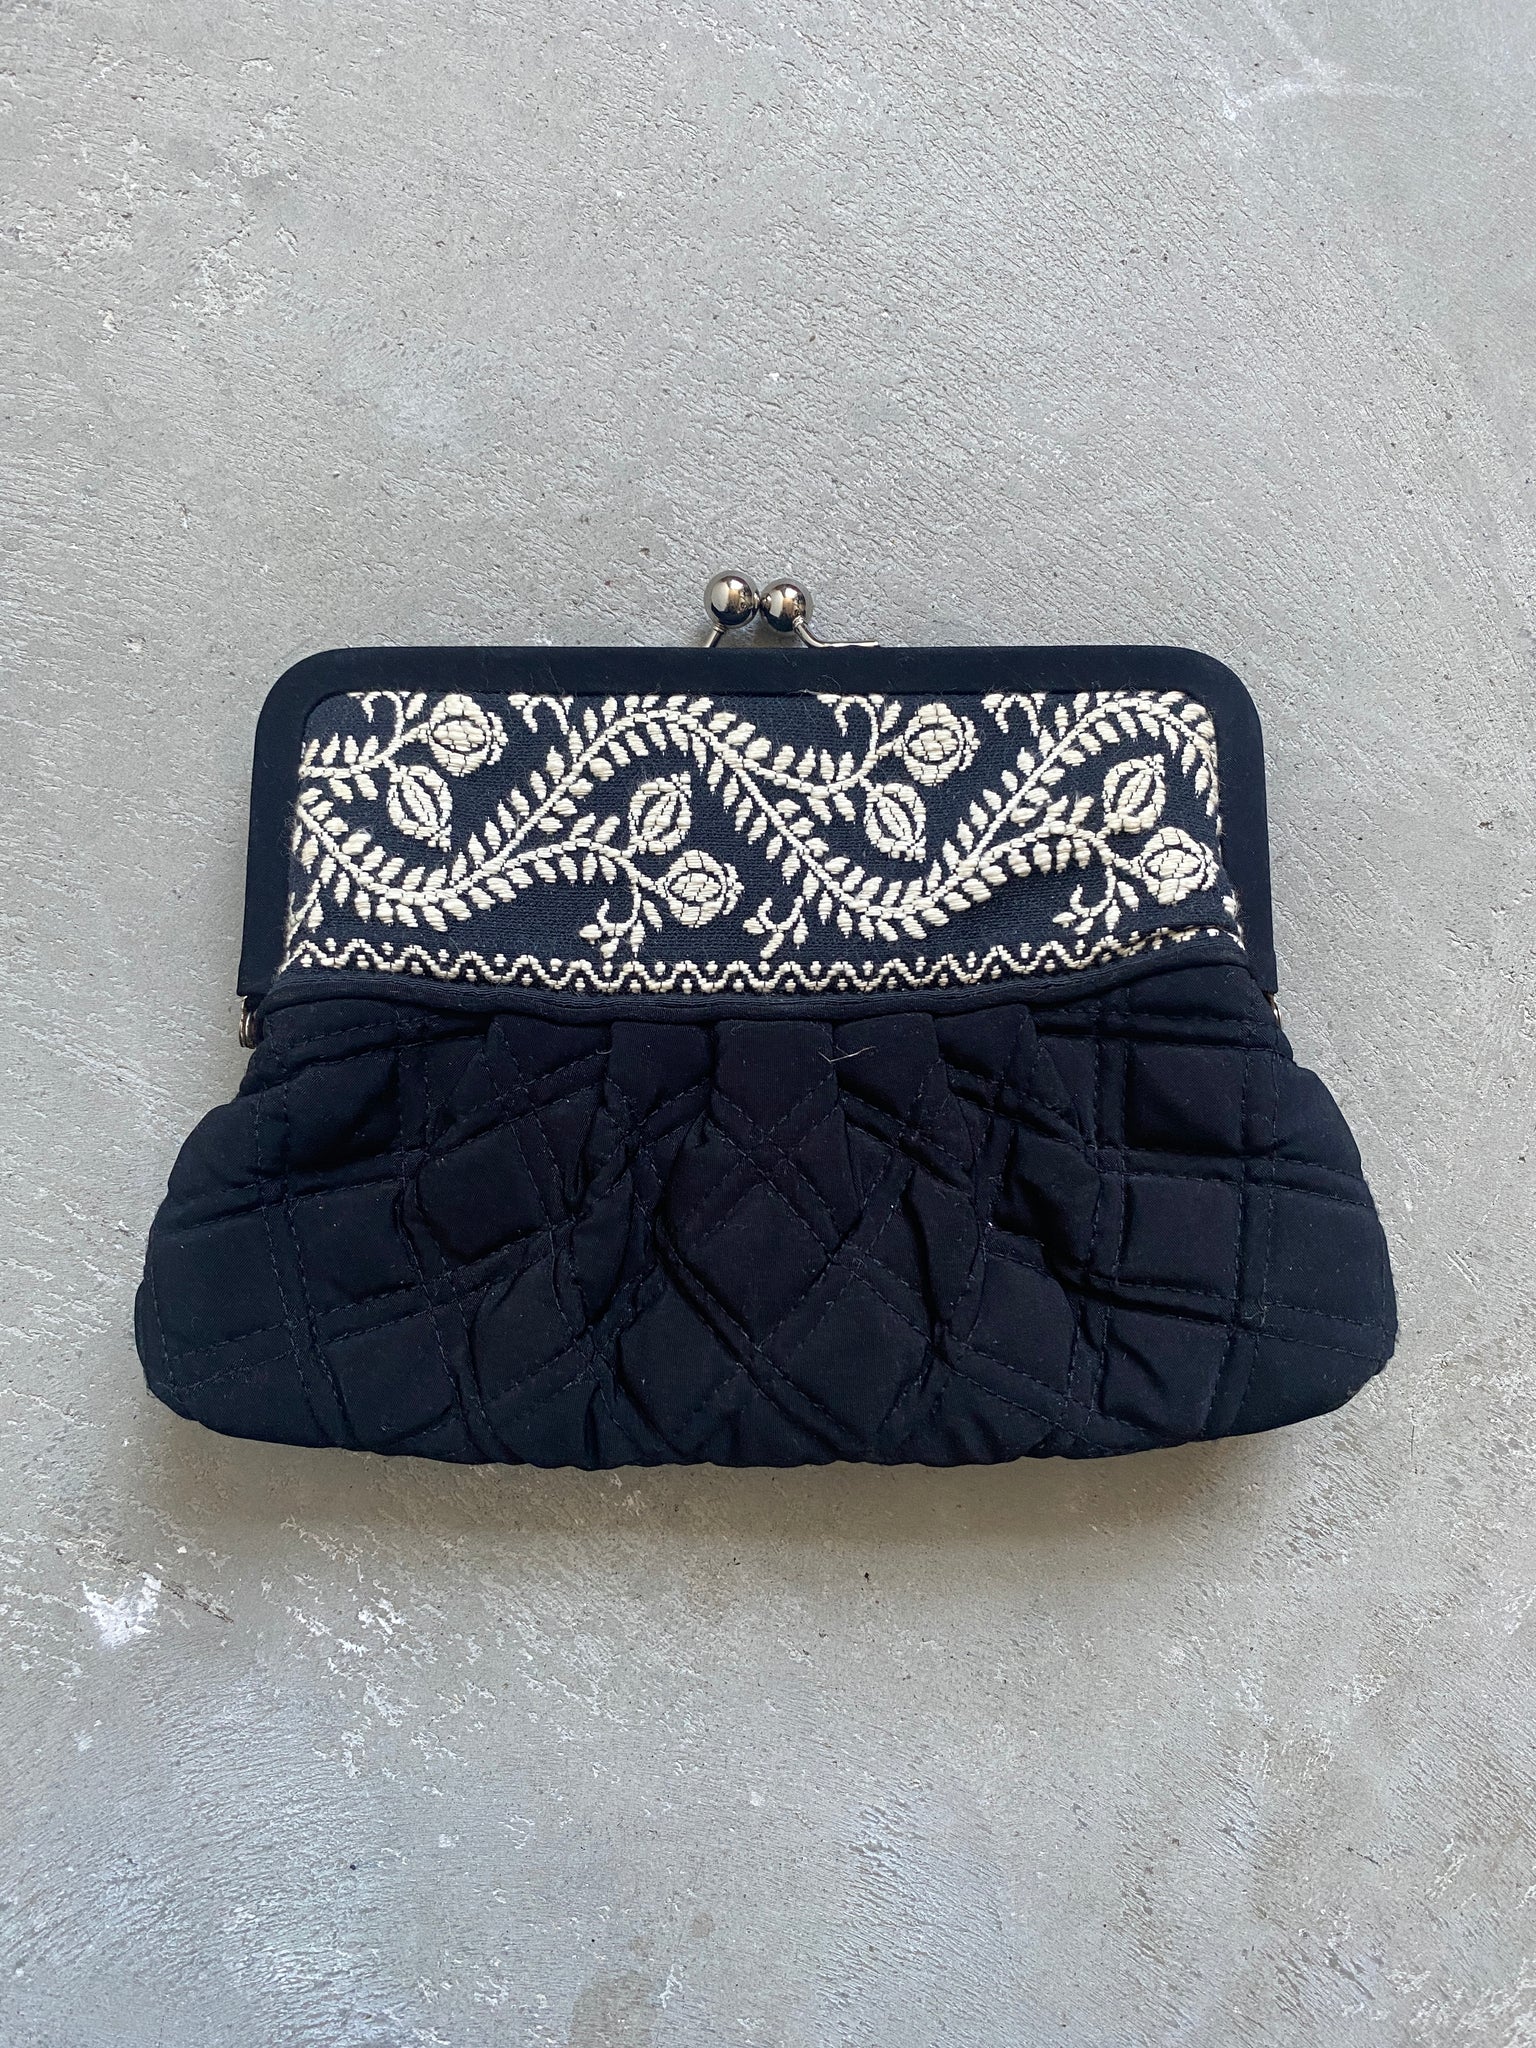 Vera Bradley Small Quilted and Embroidered Black Bag – The Nest